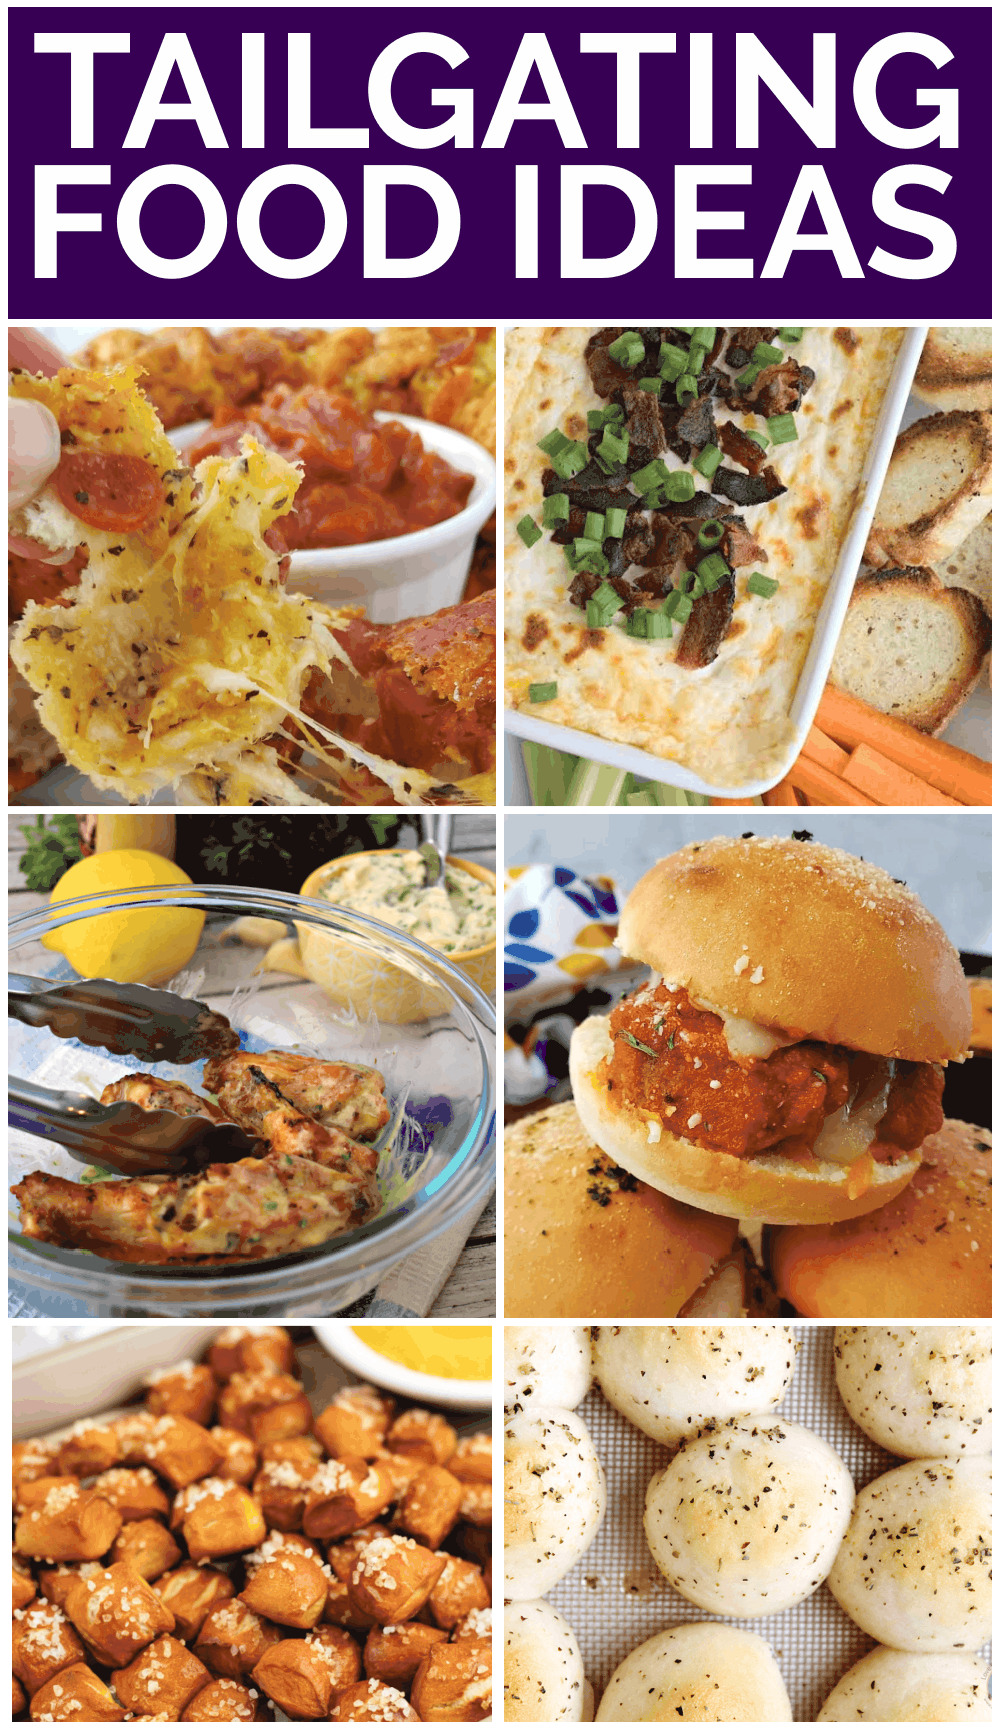 Tailgating Food Ideas - from wings and chili to guacamole and sliders we've got all the recipes you're craving on game day! via @jugglingactmama